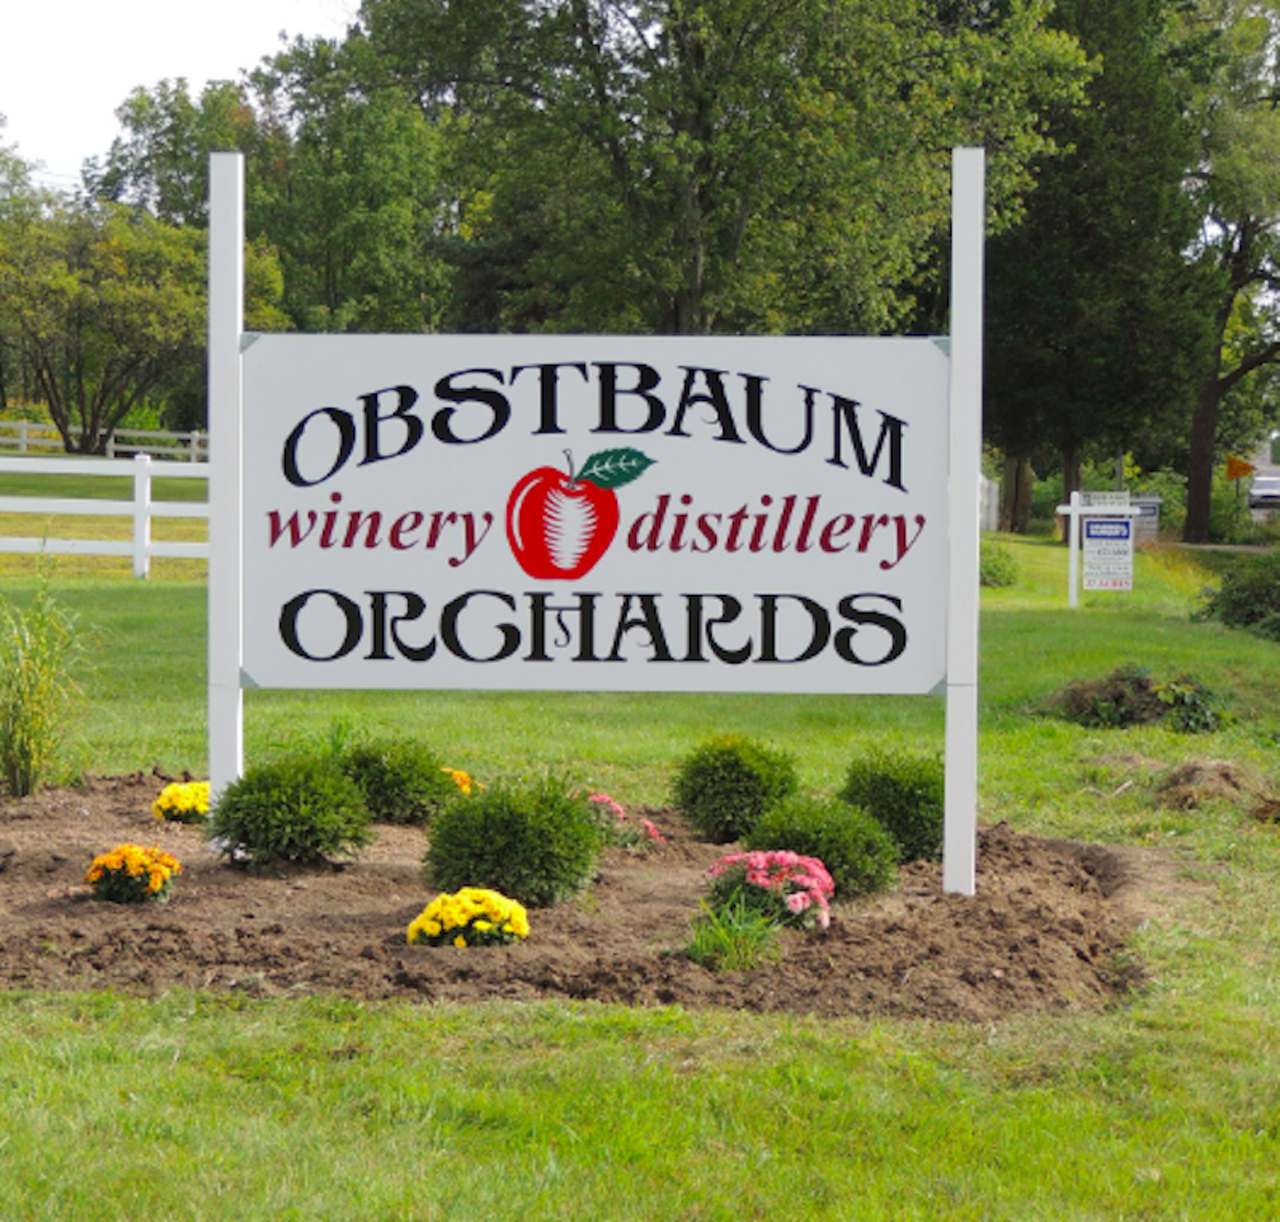 Obstbaum Orchards & Cider Mill
9252 Currie Rd., Salem; 248-468-9180; obstbaum.comThis family-run mill in Salem, which has been serving the community for over 40 years.